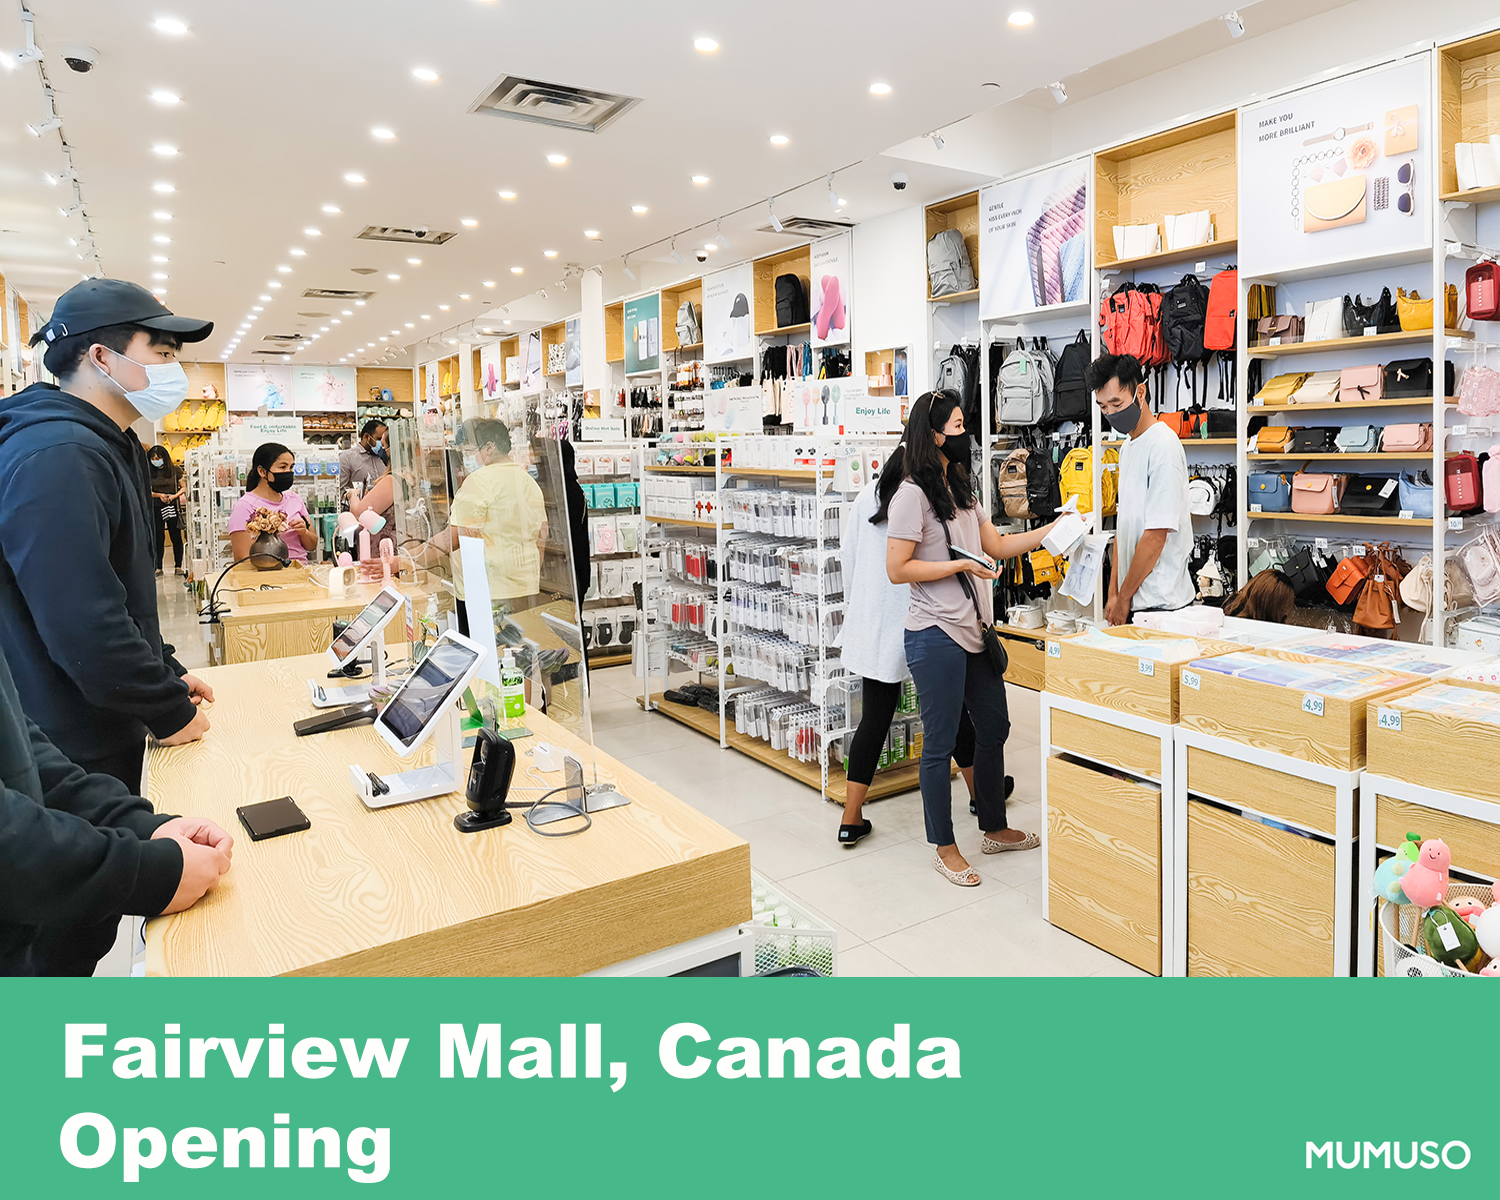 New Store Opened at Fairview Mall, Canada